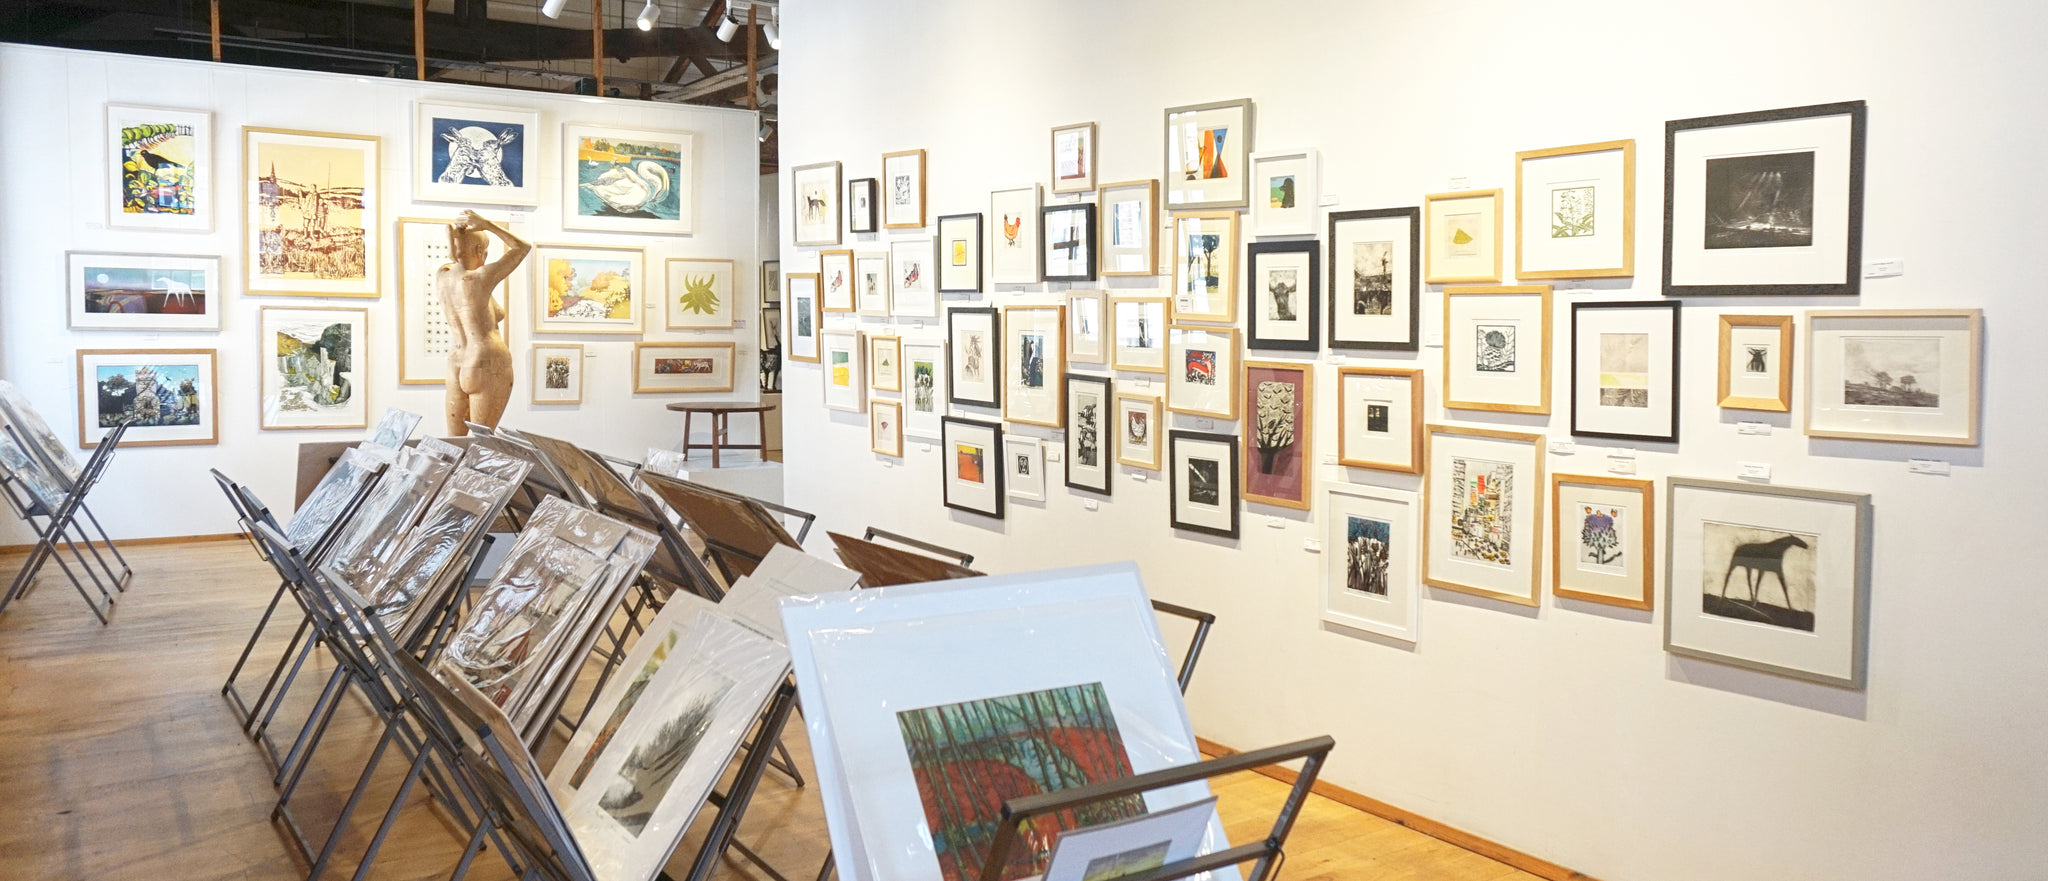 Printmakers Gallery at The Biscuit Factory